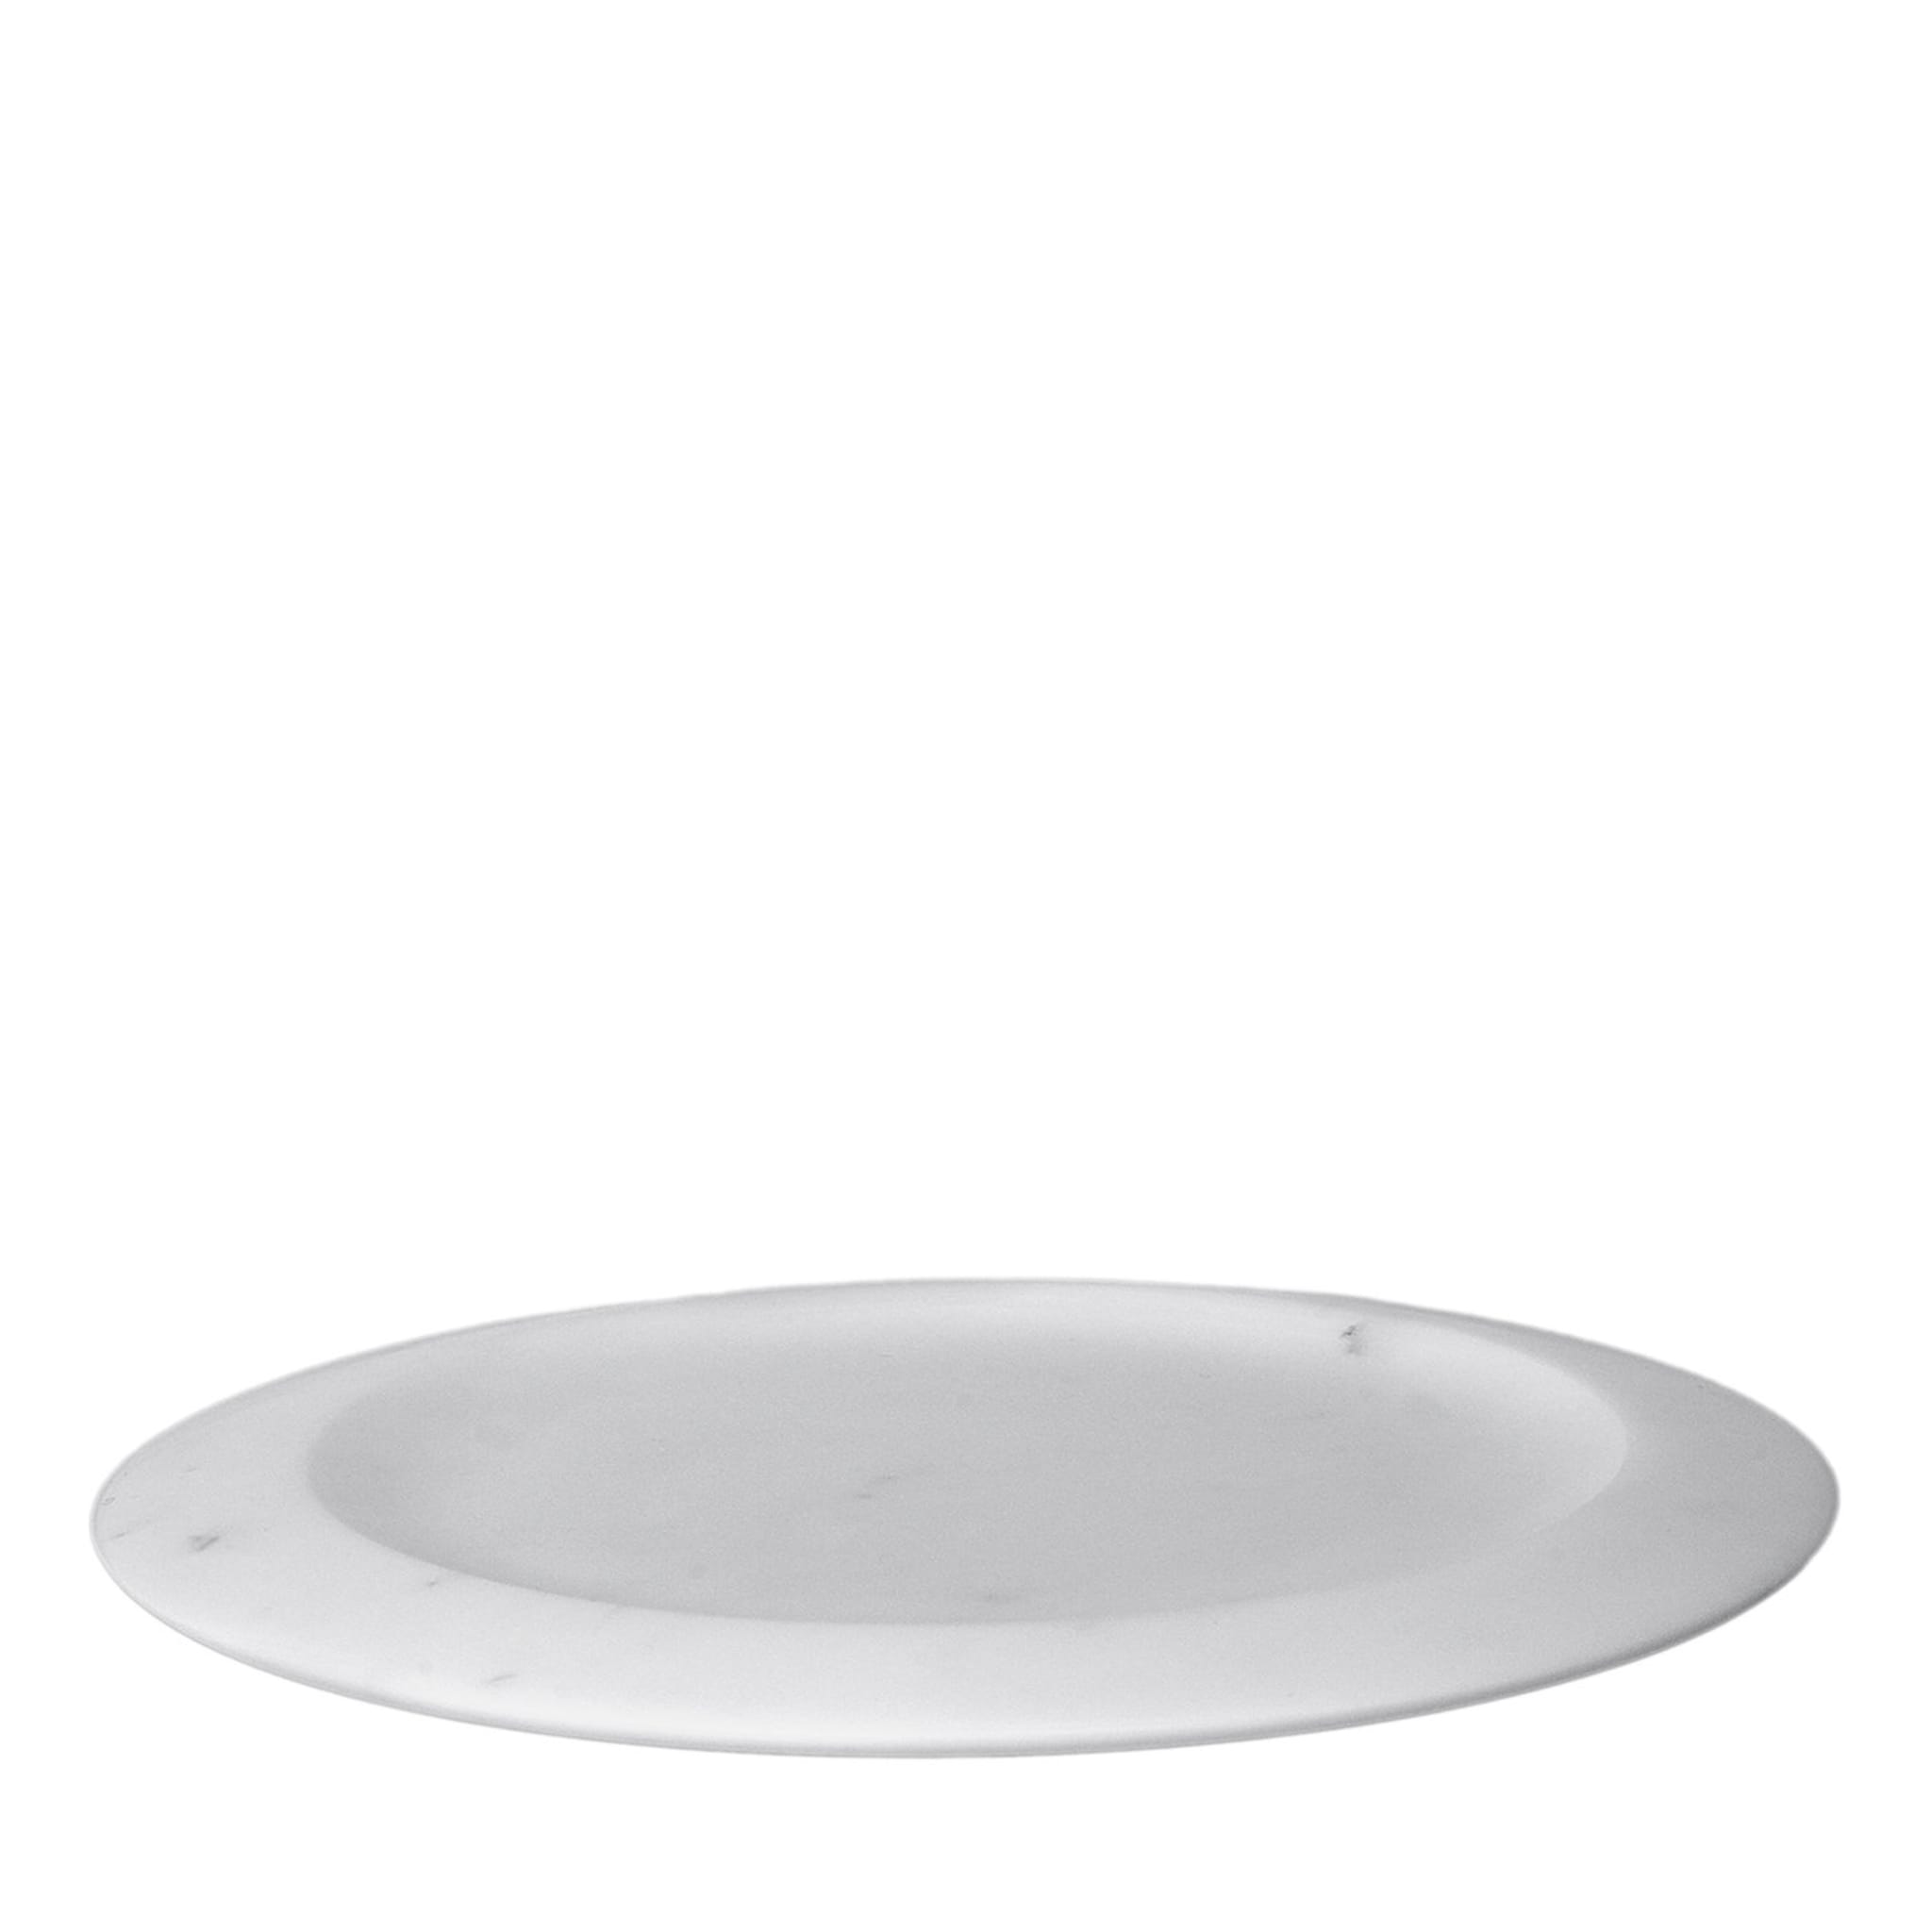 White Michelangelo Dinner Plate by Ivan Colominas #2 - Main view